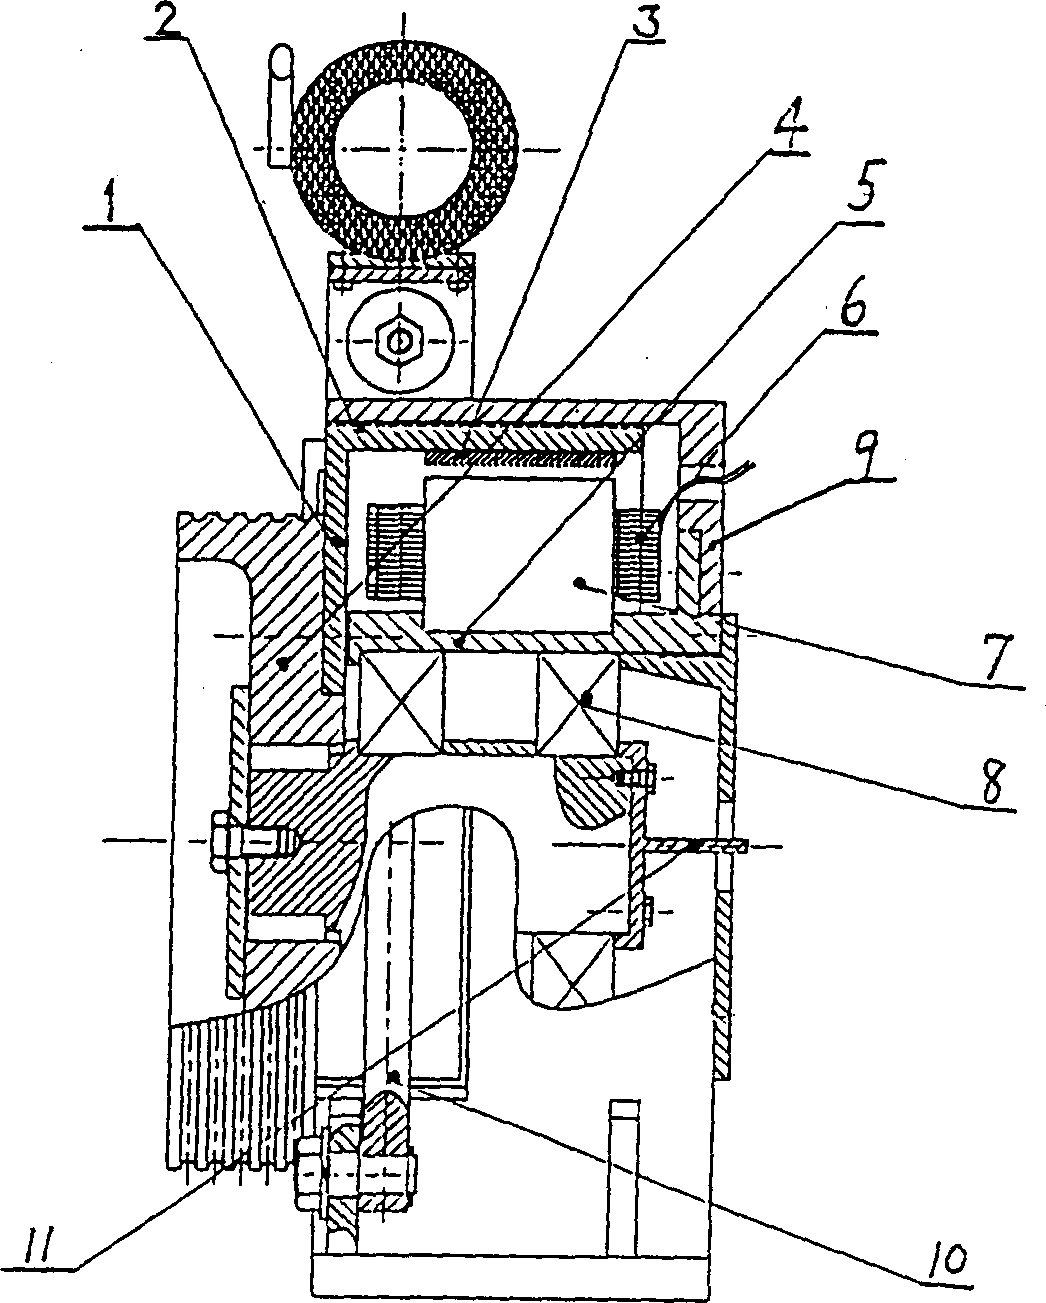 Directly driven synchronous dragger with Nd-Fe-B permanent magnetic rotor